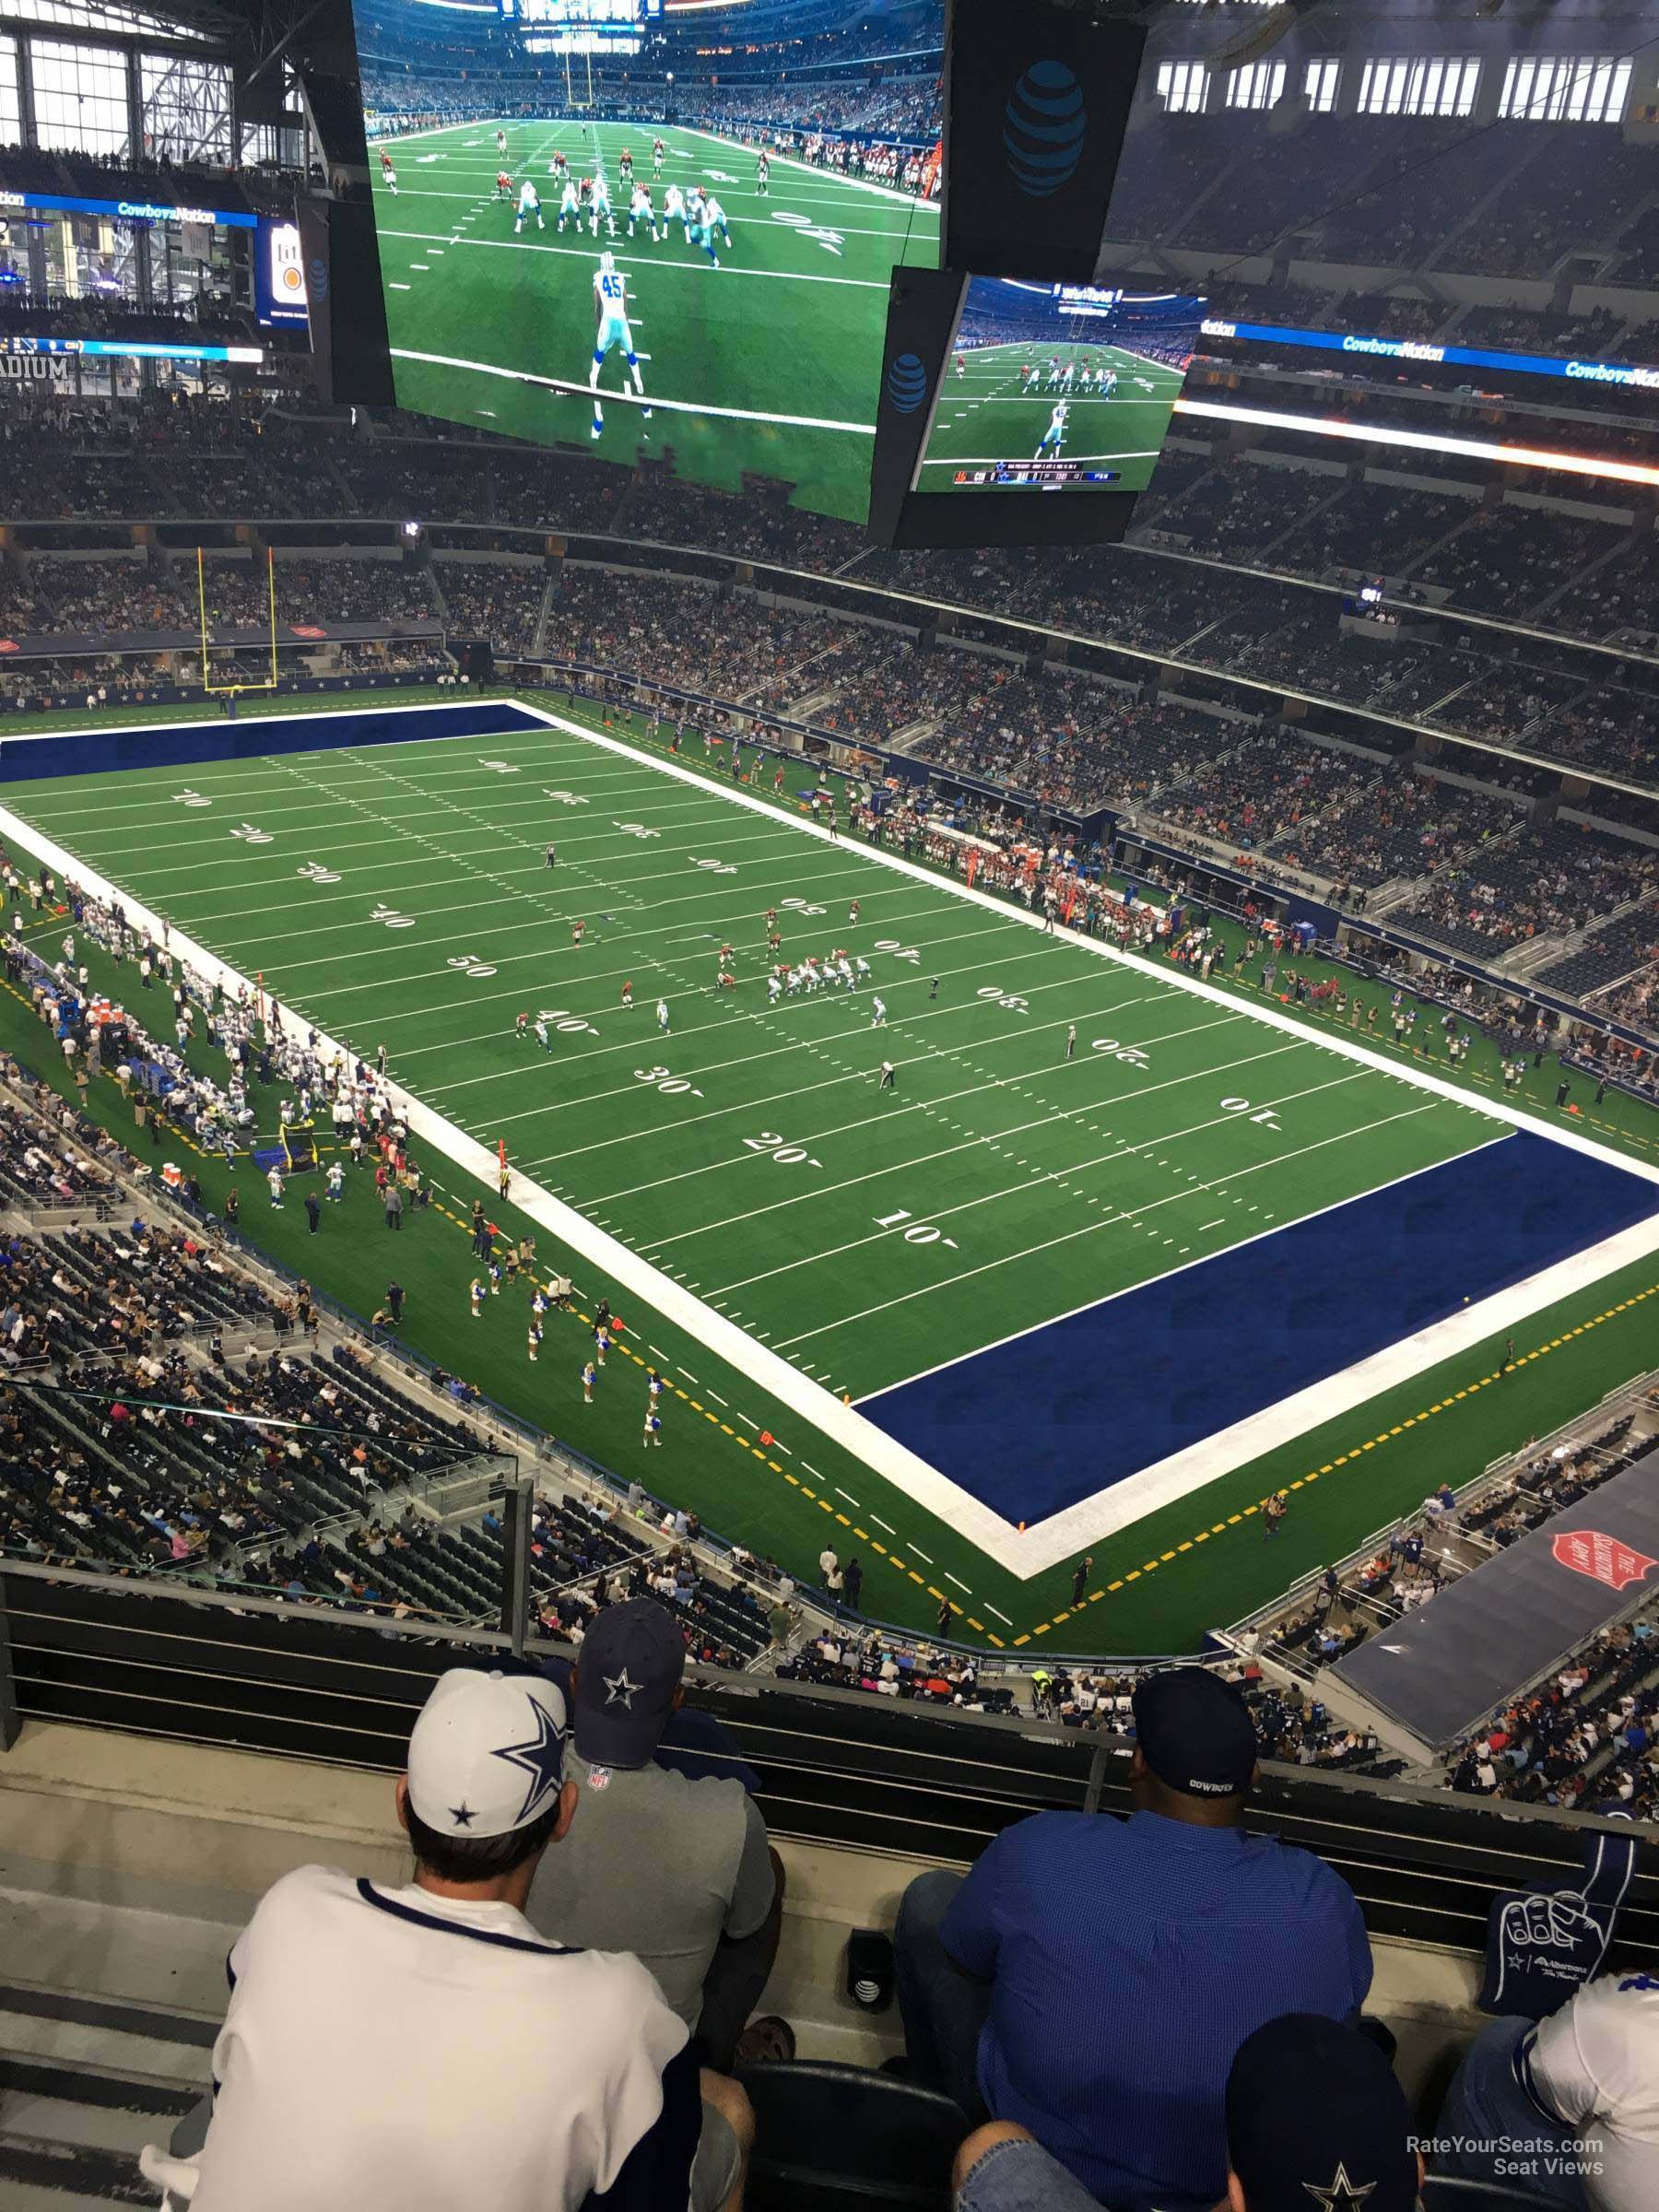 section 405, row 4 seat view  for football - at&t stadium (cowboys stadium)